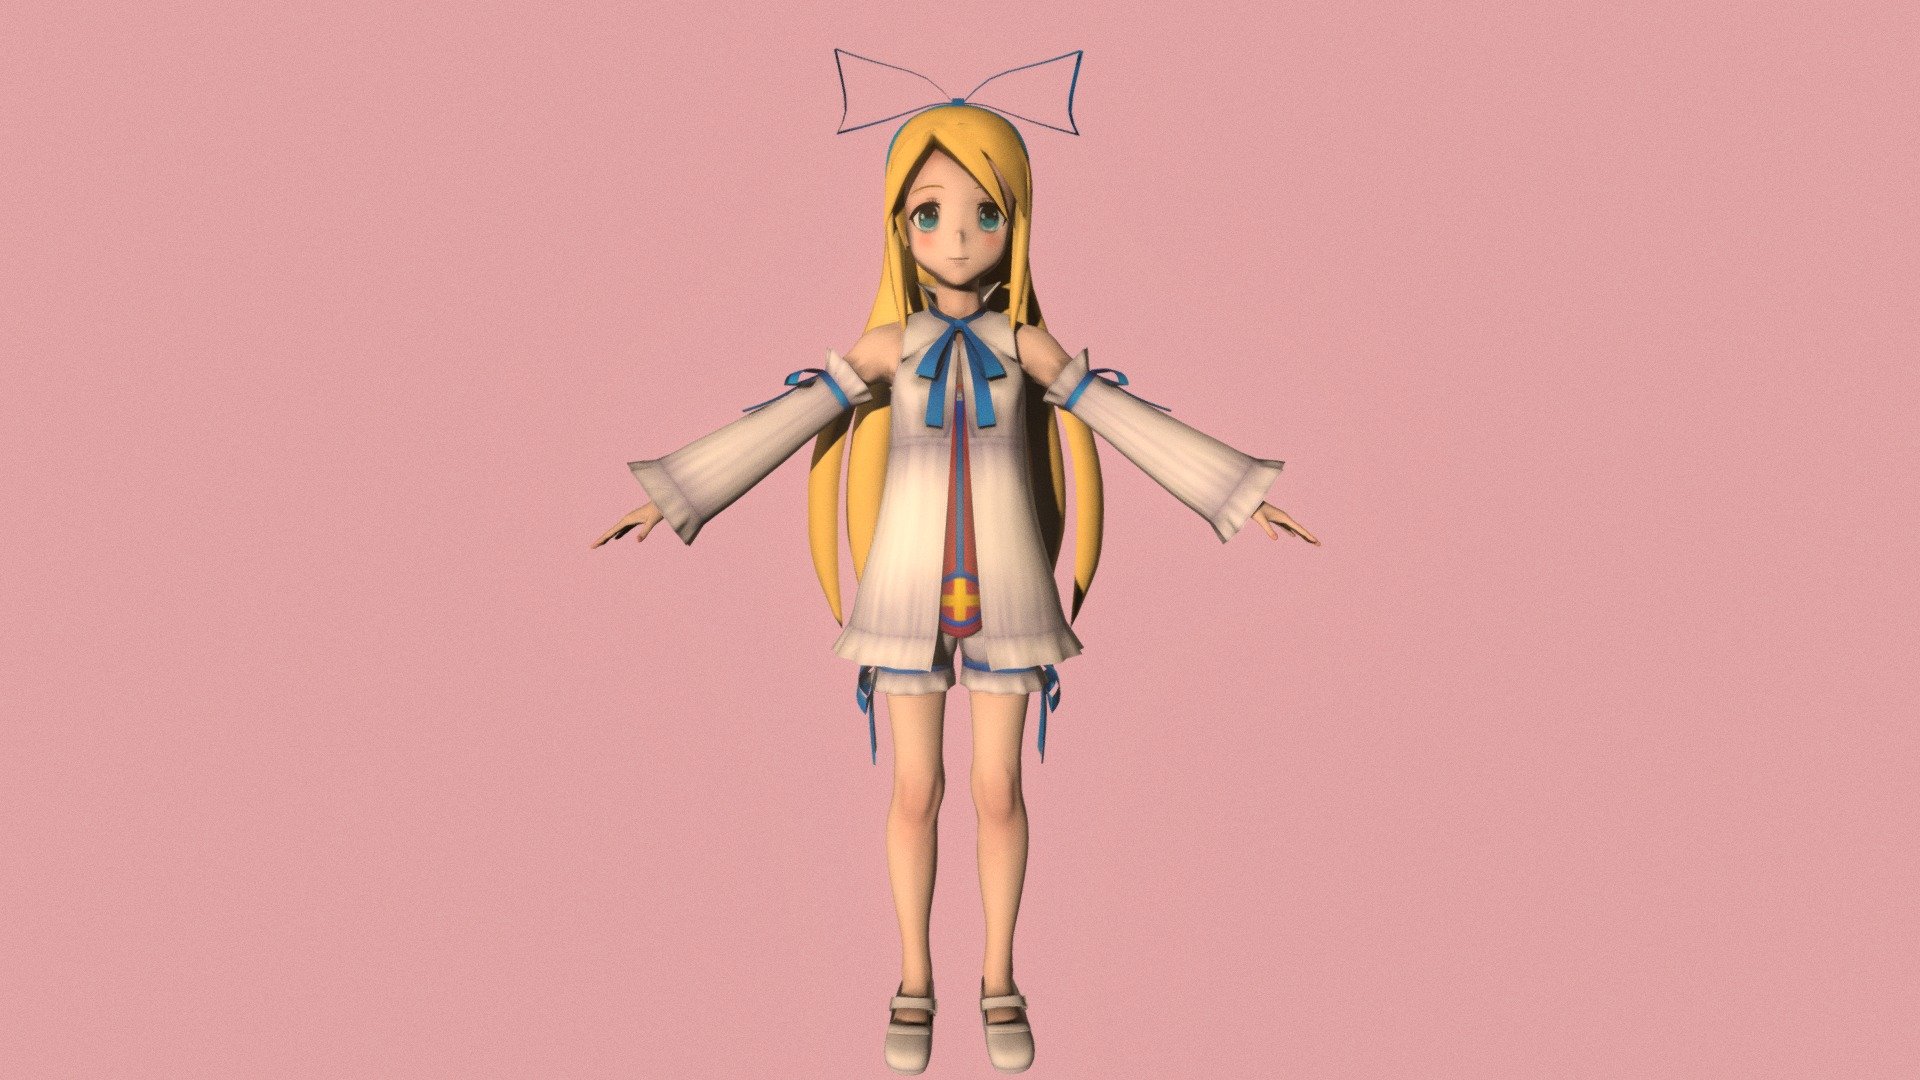 T-pose rigged model of anime girl Flonne (Disgaea).

Body and clothings are rigged and skinned by 3ds Max CAT system.

Eye direction and facial animation controlled by Morpher modifier / Shape Keys / Blendshape.

This product include .FBX (ver. 7200) and .MAX (ver. 2010) files.

3ds Max version is turbosmoothed to give a high quality render (as you can see here).

Original main body mesh have ~7.000 polys.

This 3D model may need some tweaking to adapt the rig system to games engine and other platforms.

I support convert model to various file formats (the rig data will be lost in this process): 3DS; AI; ASE; DAE; DWF; DWG; DXF; FLT; HTR; IGS; M3G; MQO; OBJ; SAT; STL; W3D; WRL; X.

You can buy all of my models in one pack to save cost: https://sketchfab.com/3d-models/all-of-my-anime-girls-c5a56156994e4193b9e8fa21a3b8360b

And I can make commission models.

If you have any questions, please leave a comment or contact me via my email 3d.eden.project@gmail.com 3d model